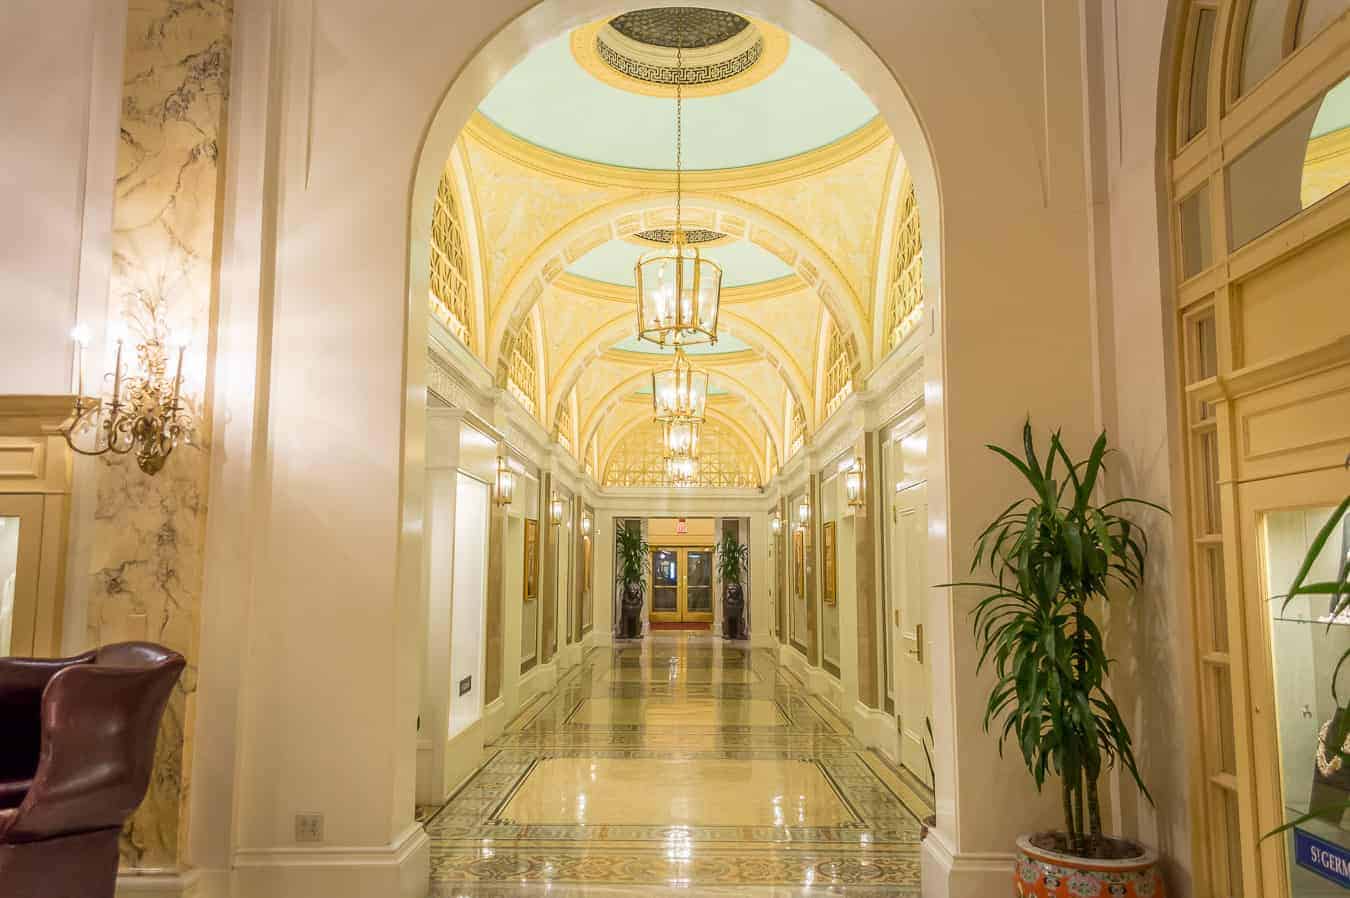 A large hallway with decorative arches and lights